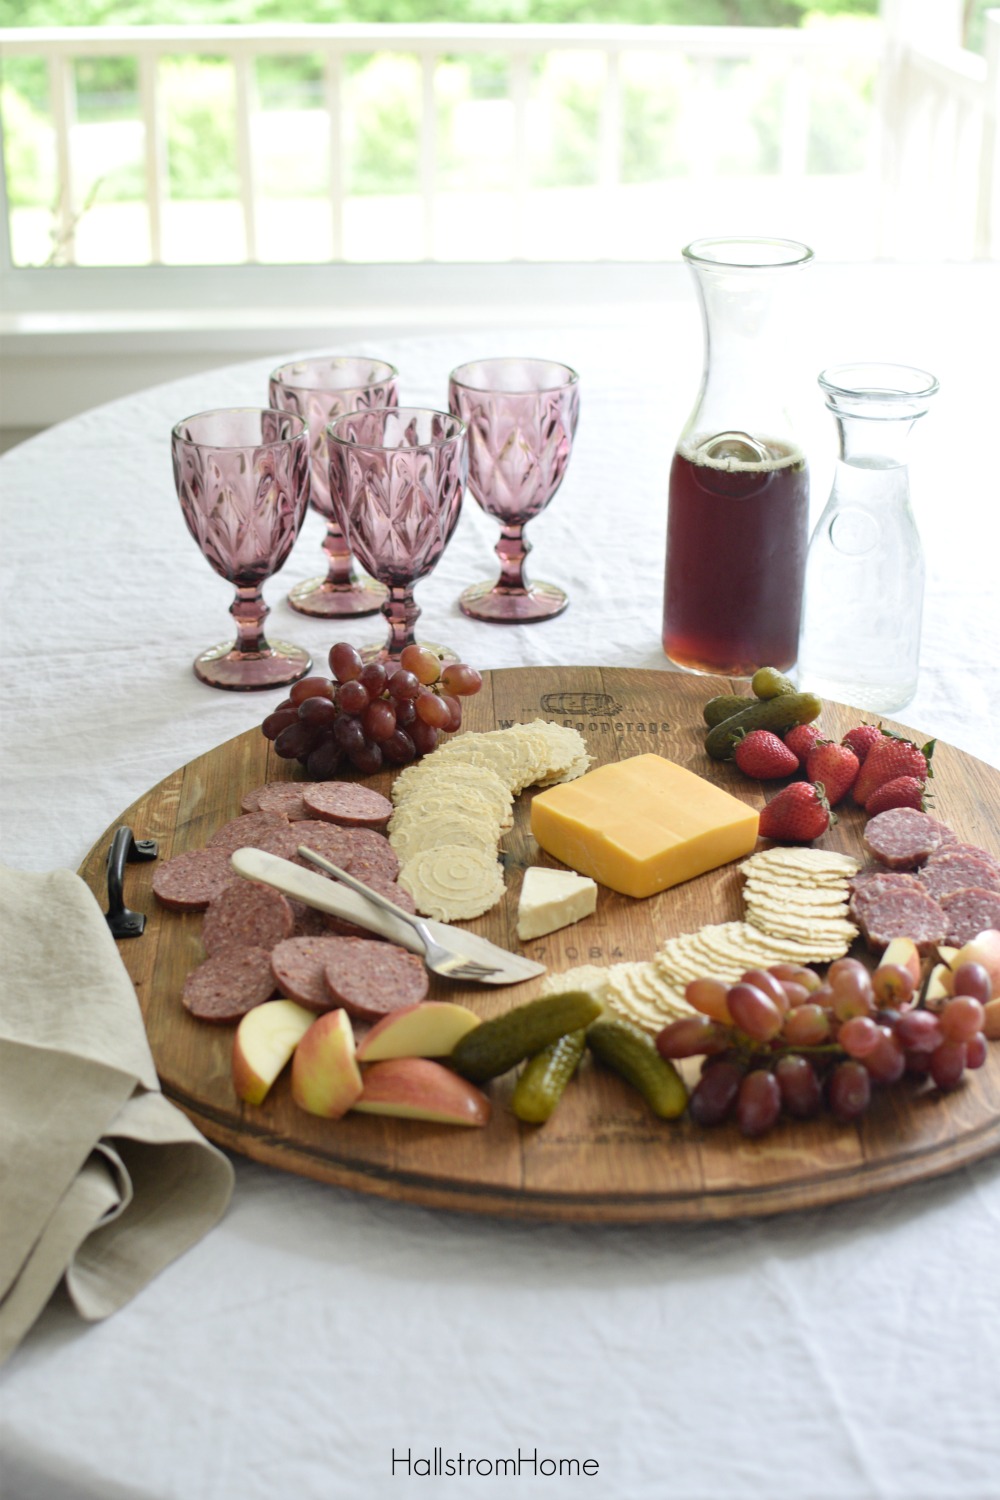 How to Make a Wine Barrel Cheese Board the Easy Way